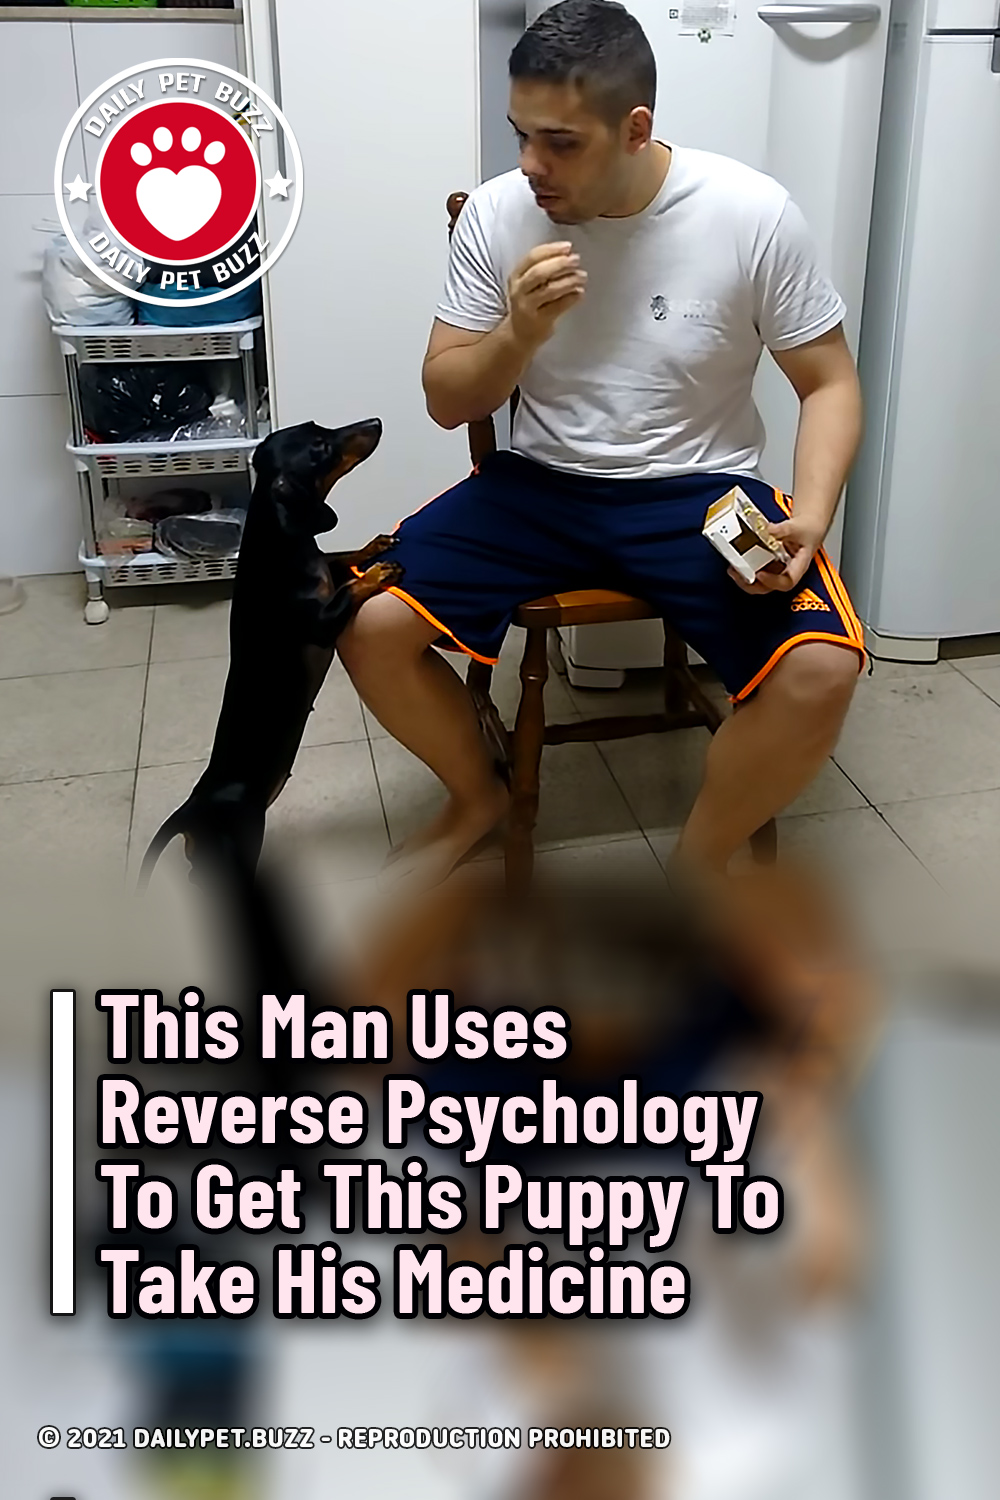 This Man Uses Reverse Psychology To Get This Puppy To Take His Medicine